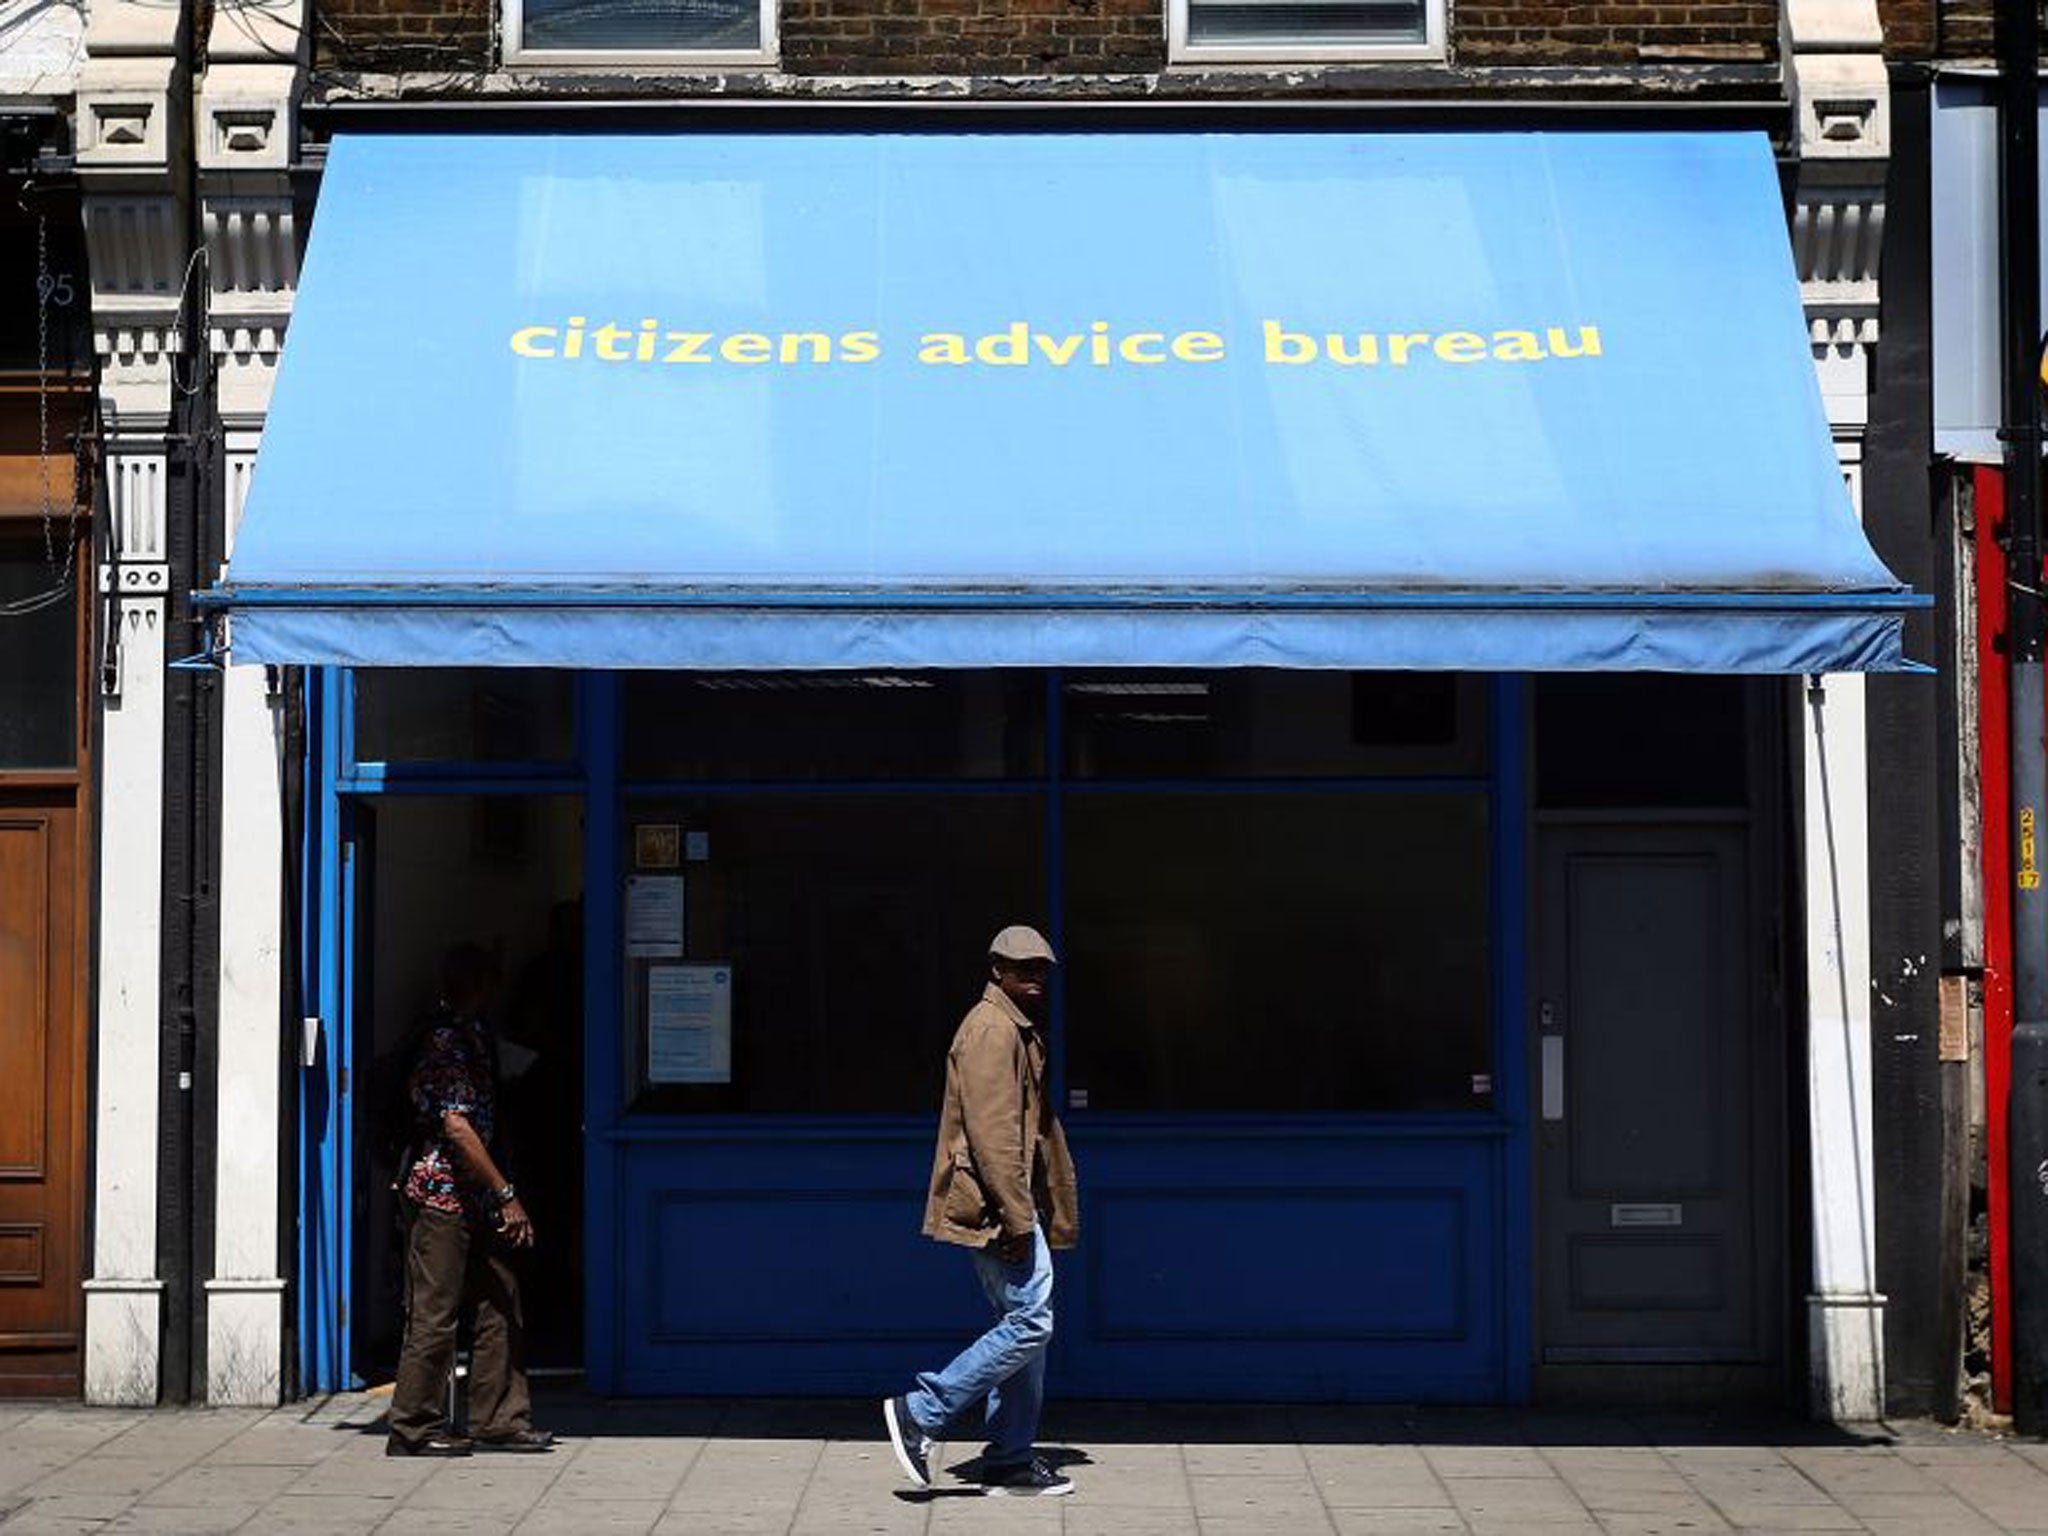 London’s busiest Citizens Advice Bureau, where thousands of people at the sharp end of Britain’s latest round of welfare reform come for urgent help